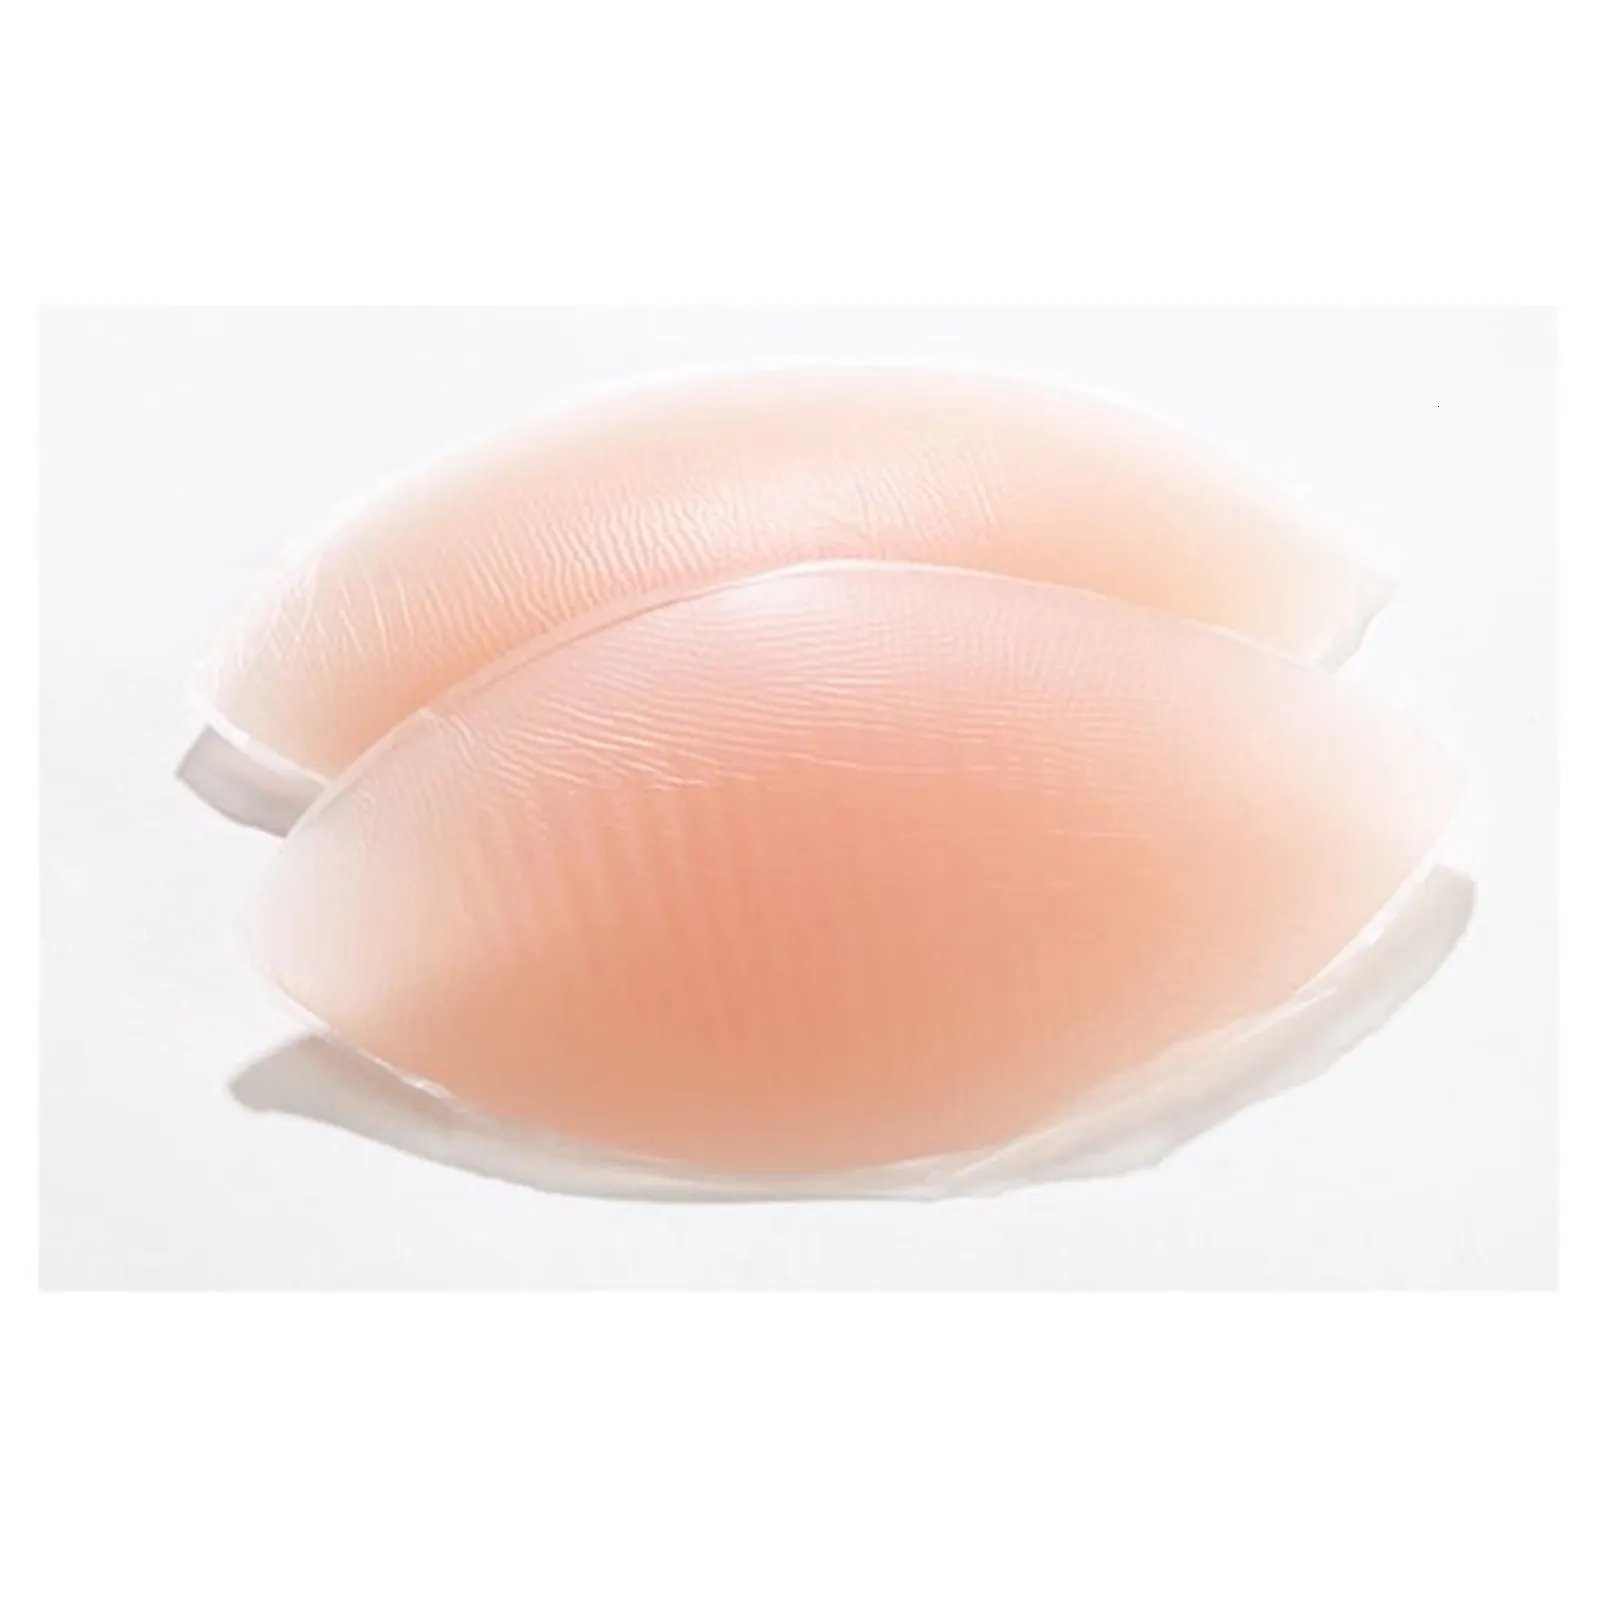 Silicone Breast Pad Watson For Women Invisible Push Up Inserts For Dress,  Bikini, Swimsuit Enhancer Padding #g3 230701 From Lian07, $14.68